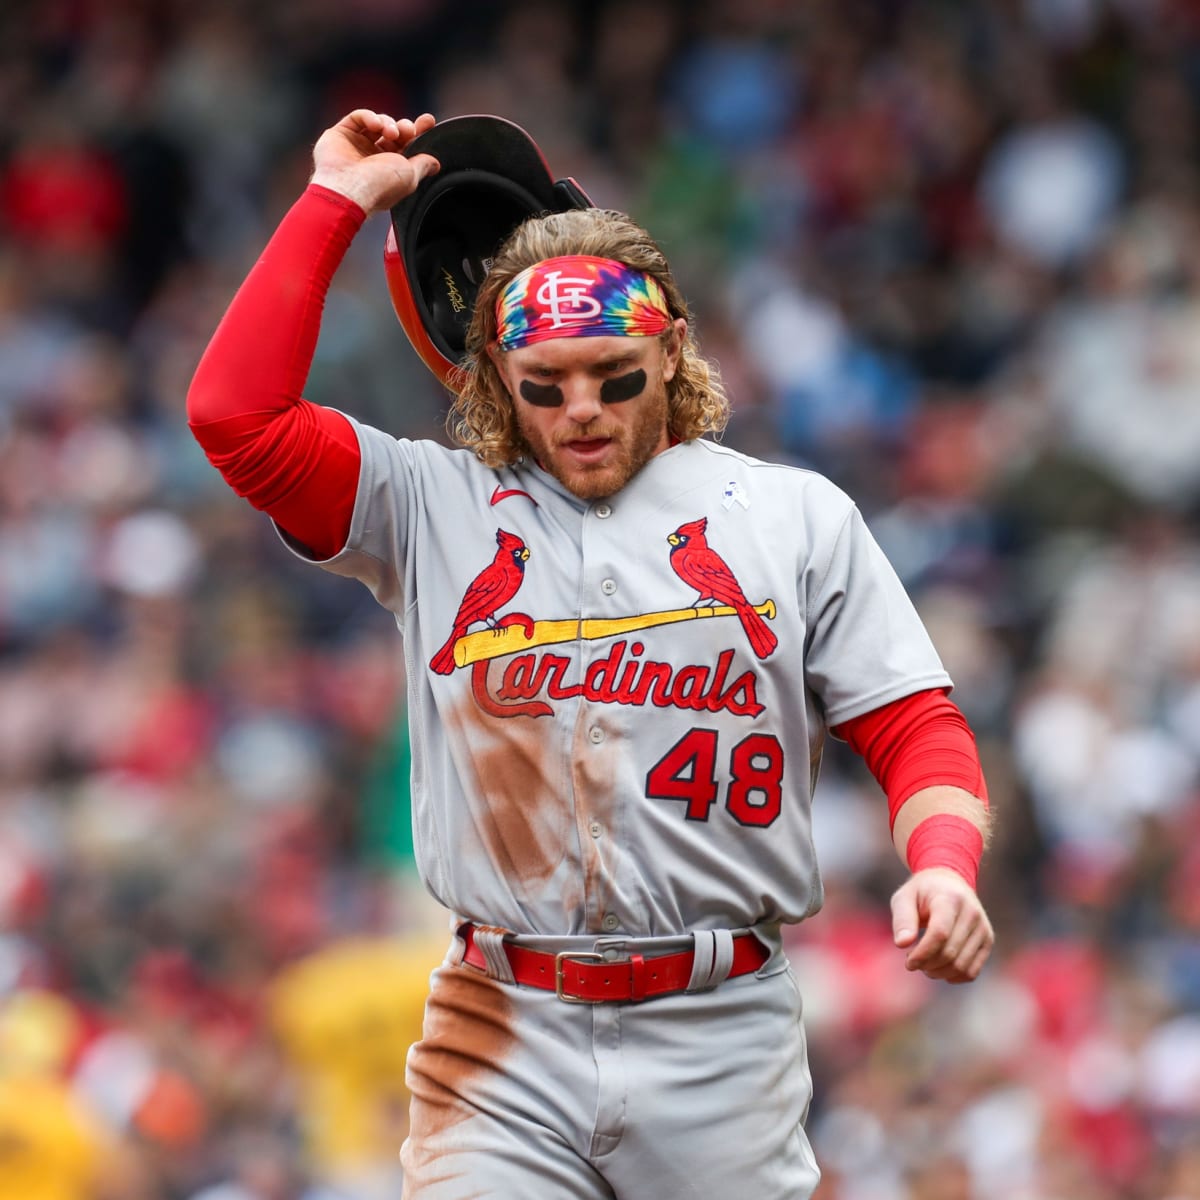 Yankees' Harrison Bader Has Priceless Reaction to Rough Career News